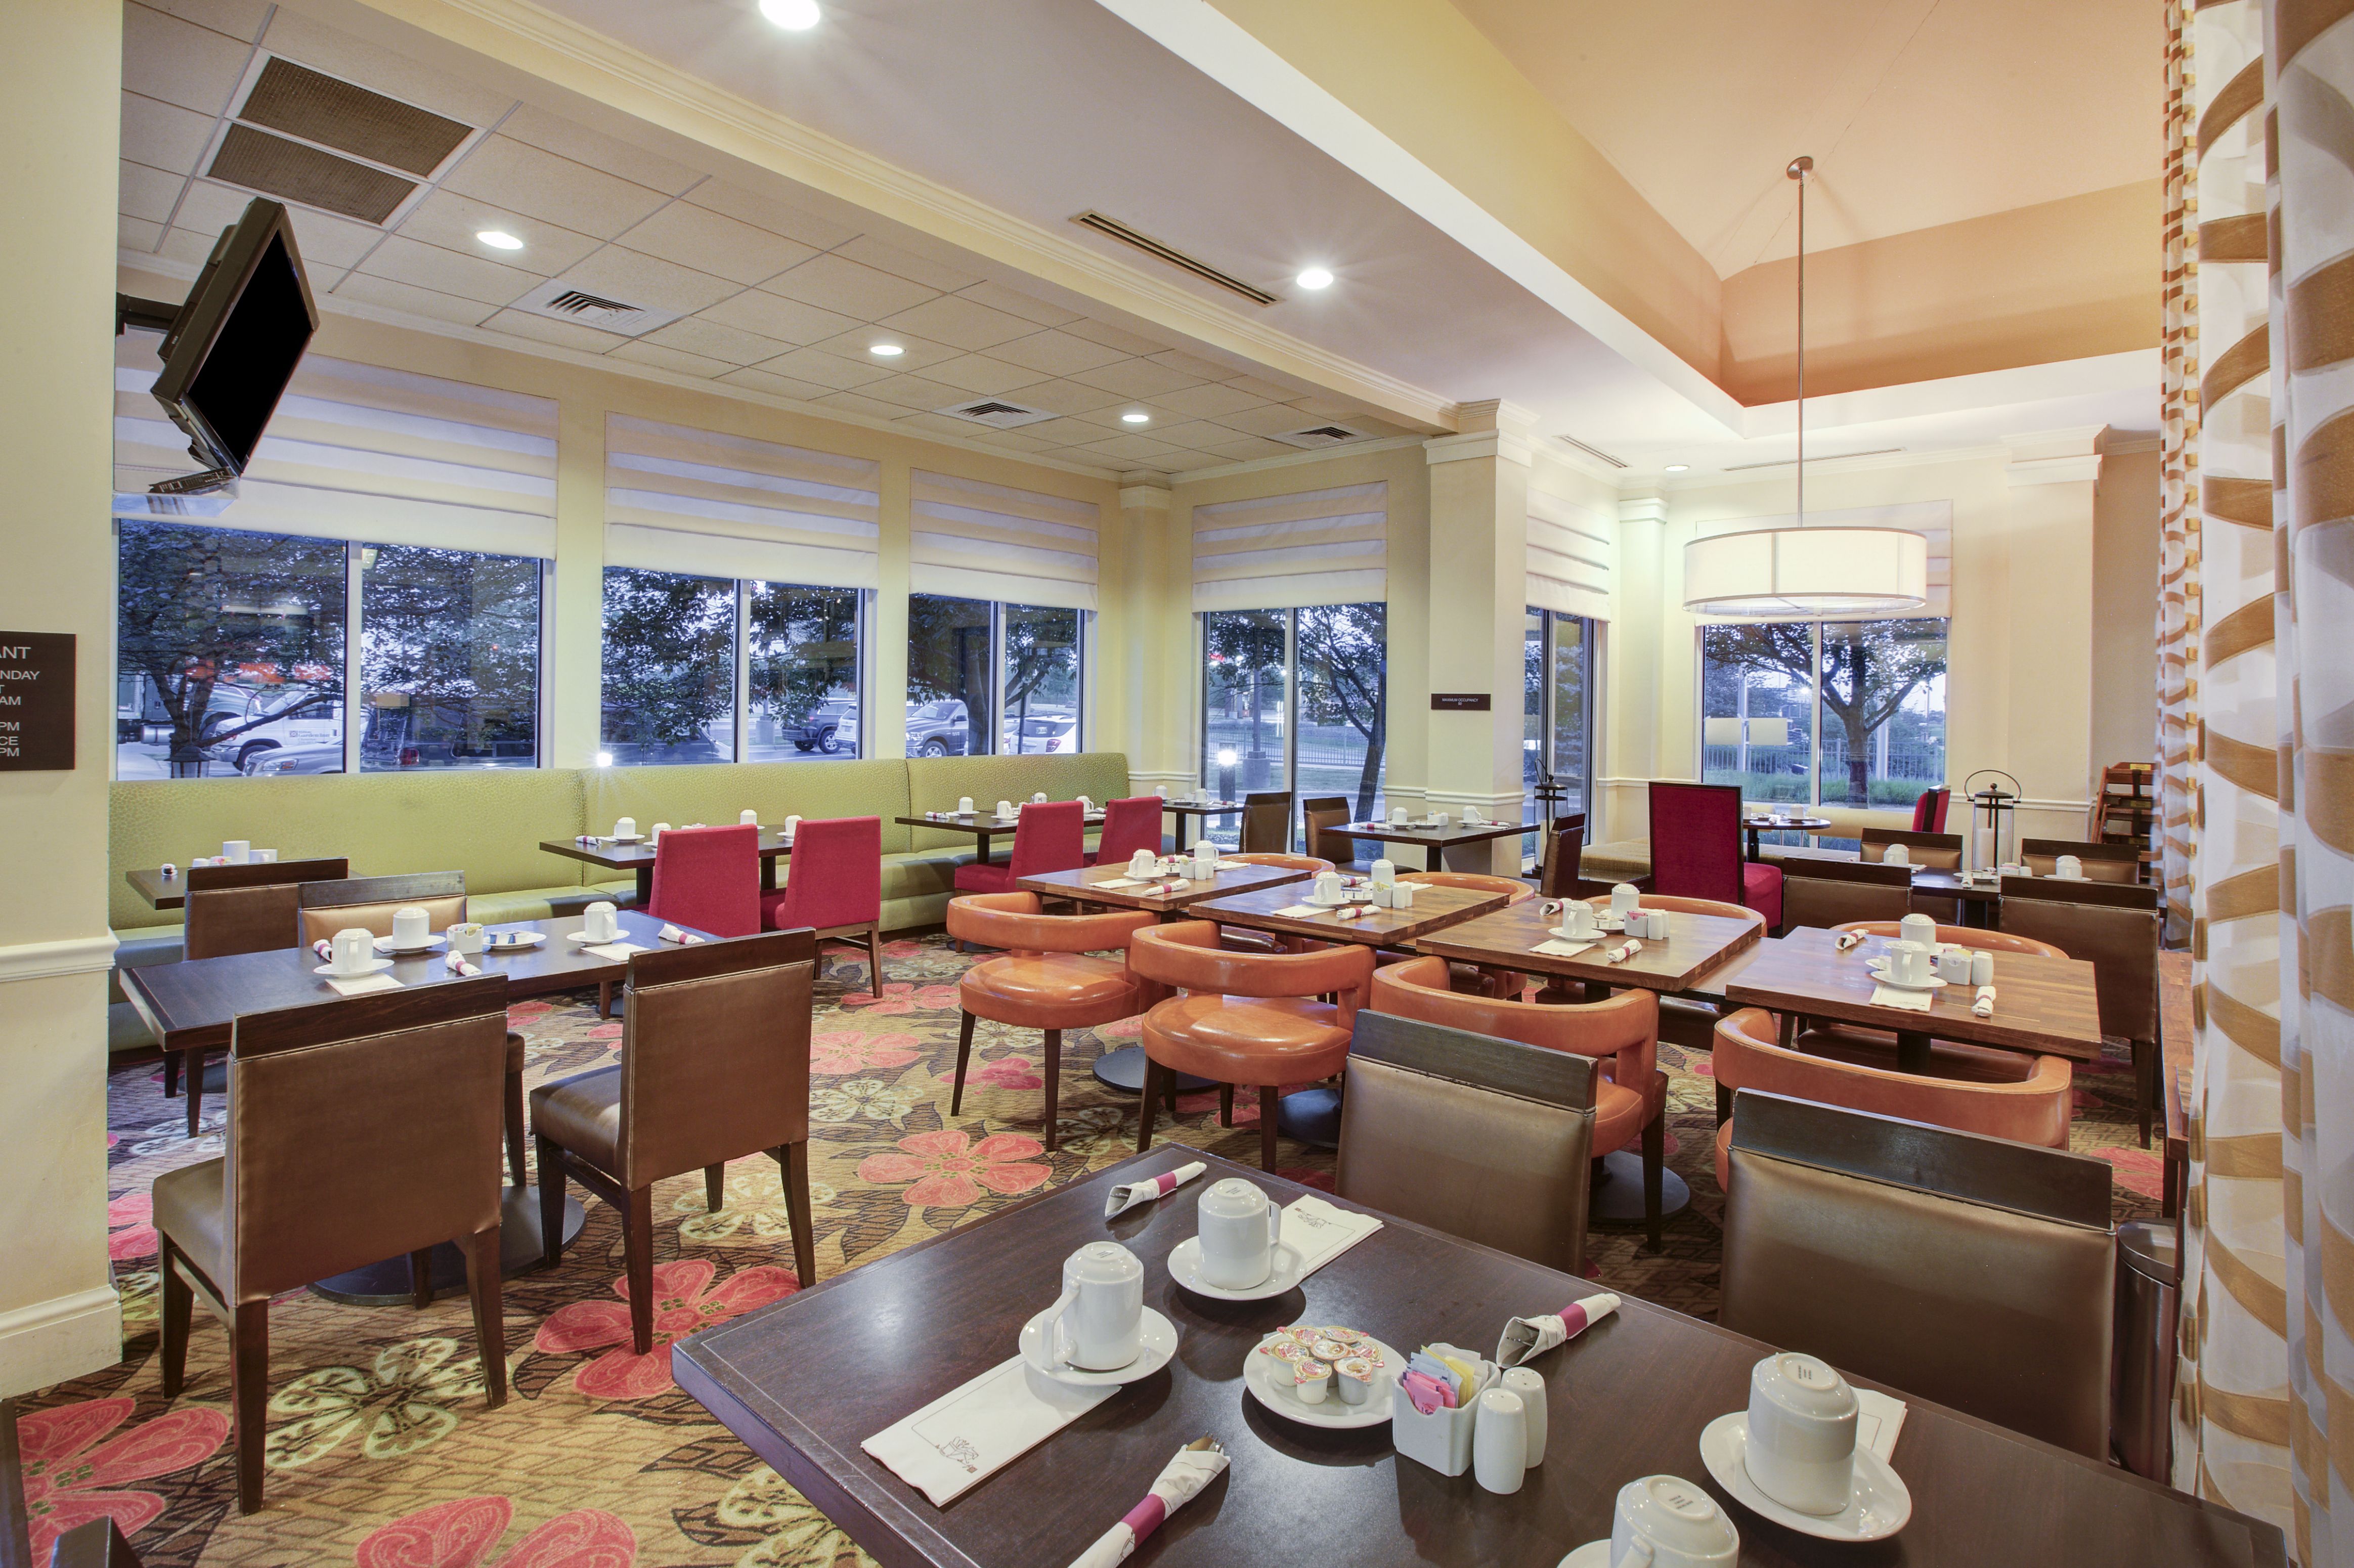 Breakfast dining area with tables, chairs, dining amenities, and windows with outdoor view